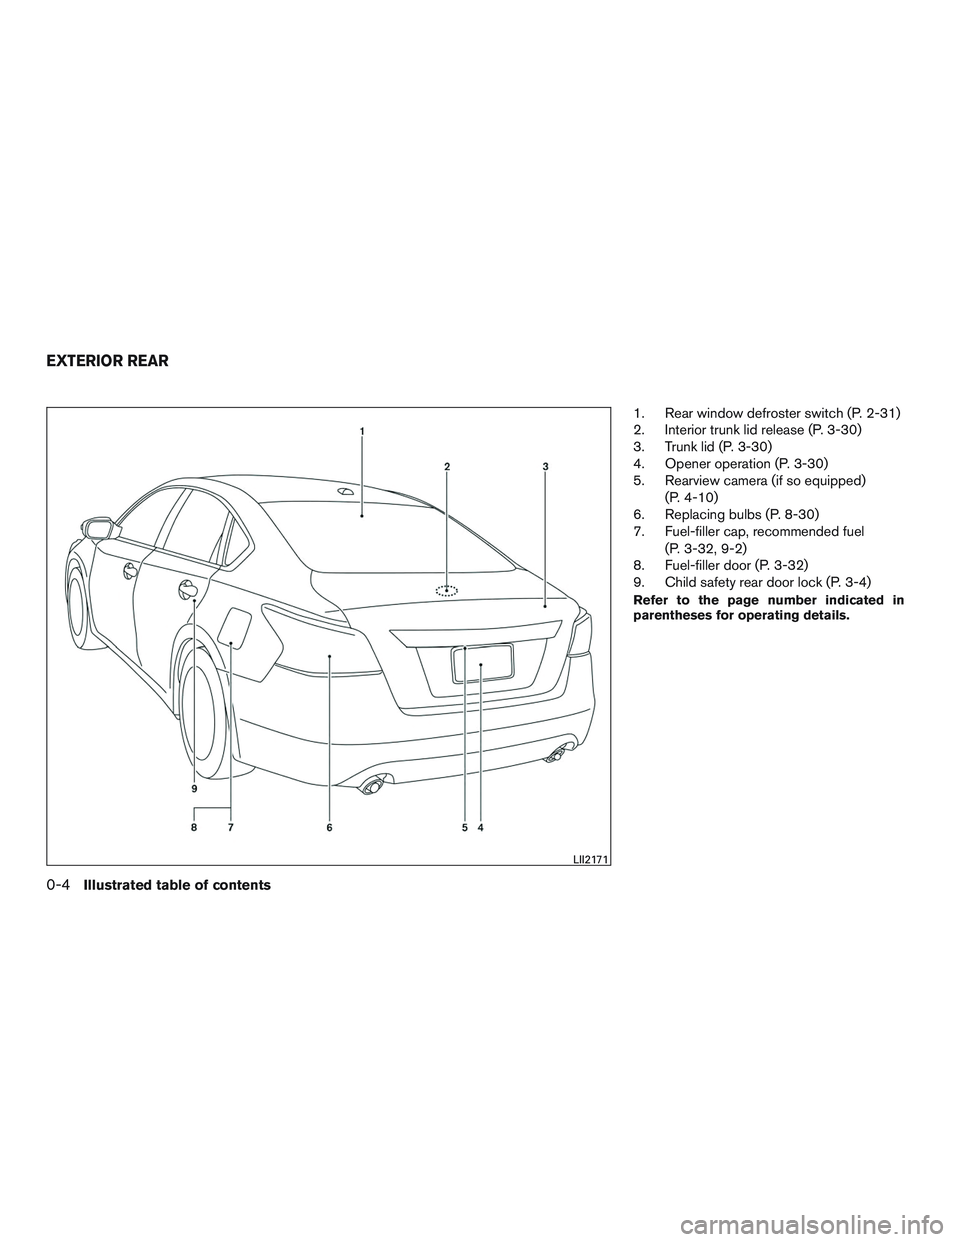 NISSAN ALTIMA SEDAN 2015  Owners Manual 1. Rear window defroster switch (P. 2-31)
2. Interior trunk lid release (P. 3-30)
3. Trunk lid (P. 3-30)
4. Opener operation (P. 3-30)
5. Rearview camera (if so equipped)(P. 4-10)
6. Replacing bulbs (